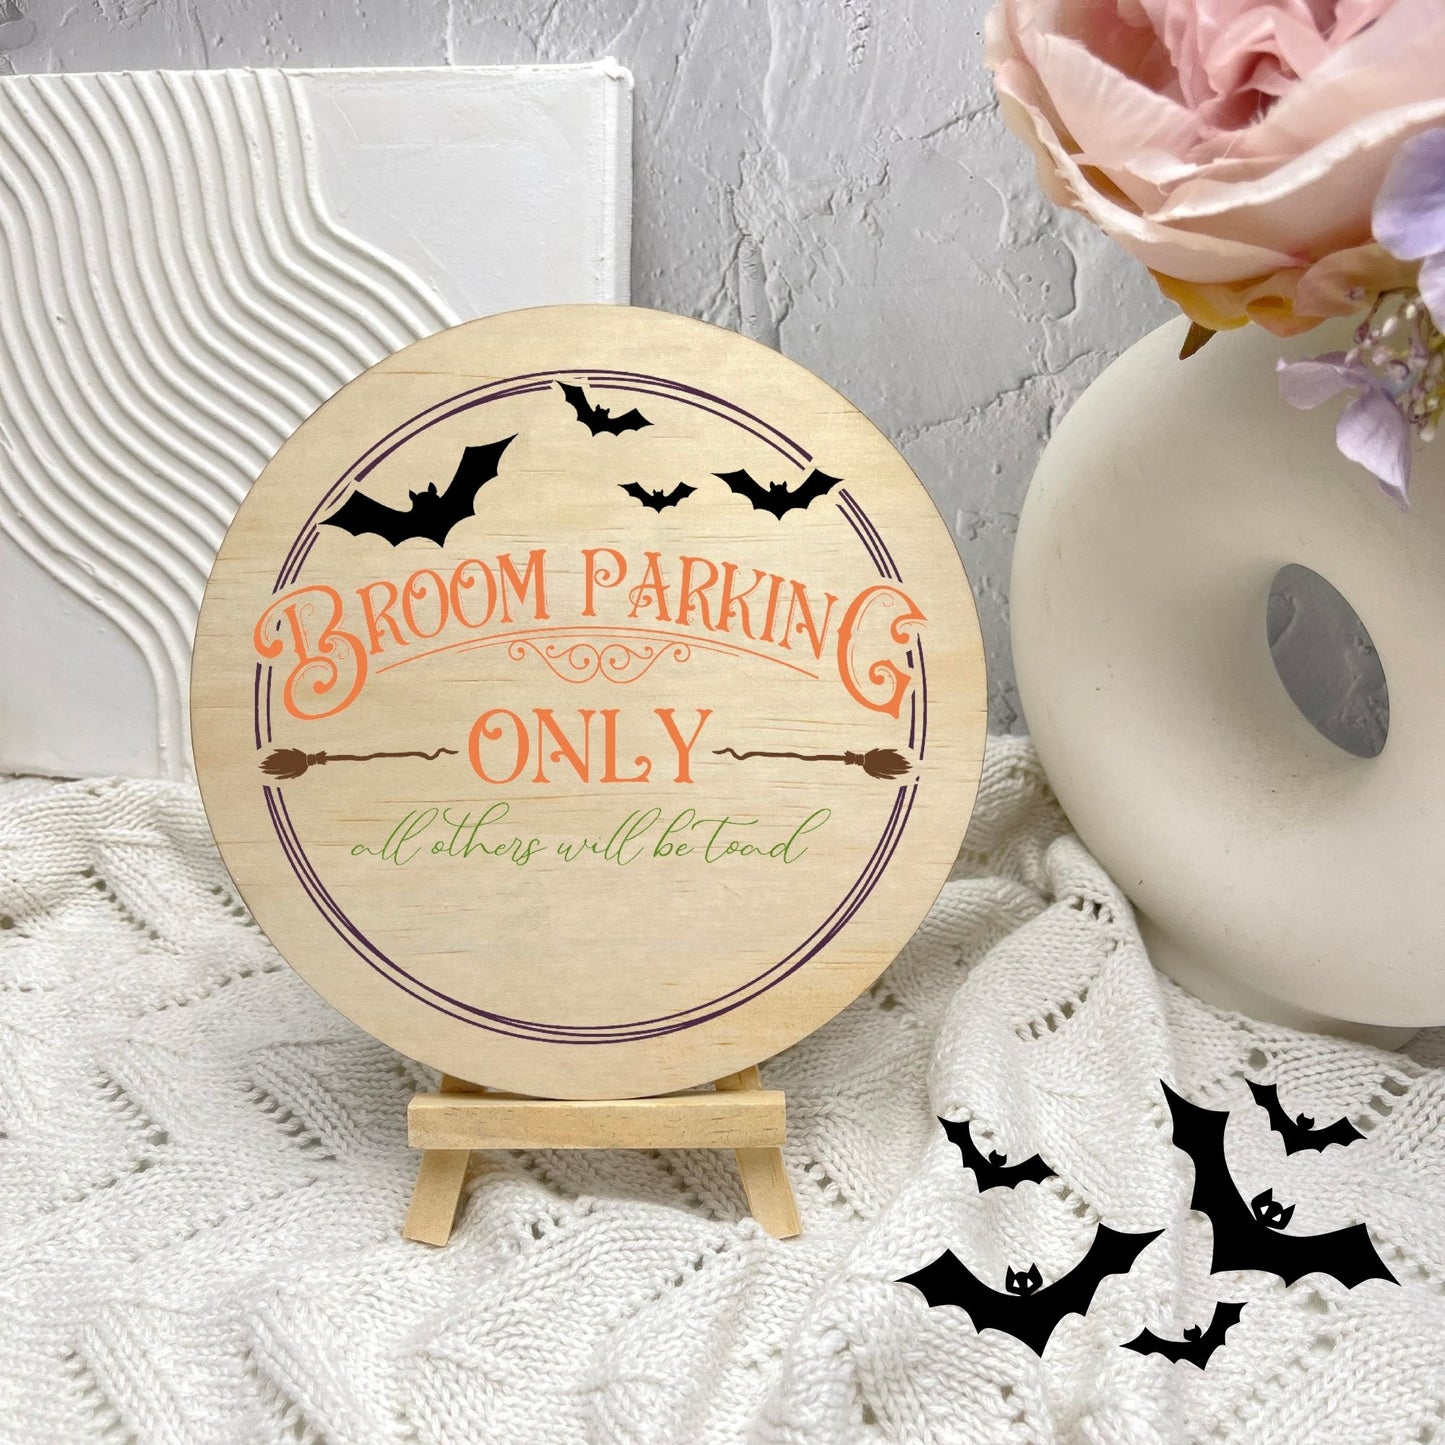 Broom parking only sign, Halloween Decor, Spooky Vibes, hocus pocus sign, trick or treat decor, haunted house h19